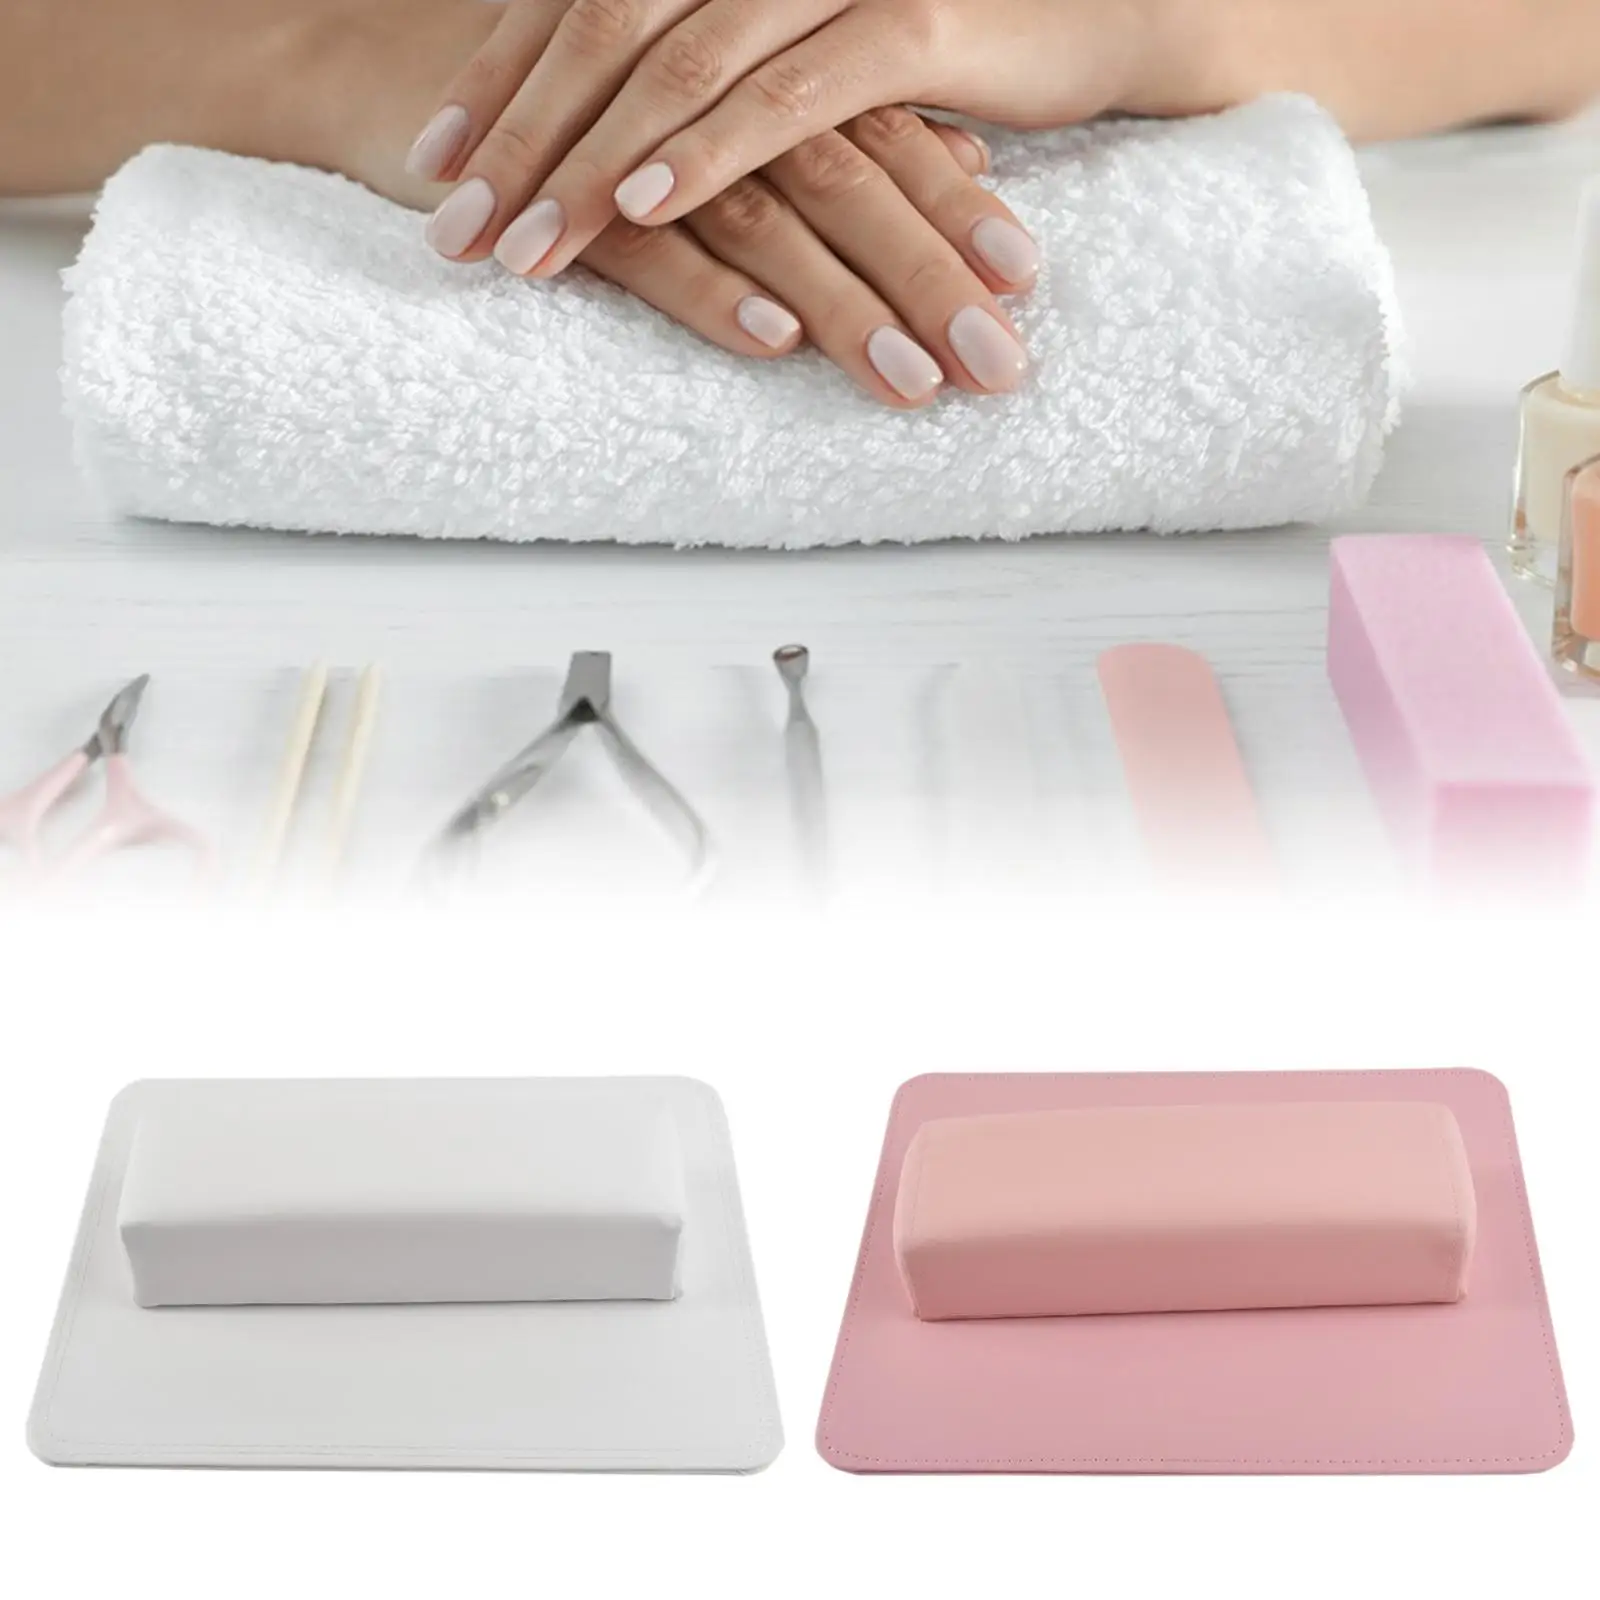 Nail Hand Pillow and Mat Set/ Nail Hand Rest Holder/ Comfortable PU Leather/ Wrist Arm Pad/ Manicure Tool for Home Salon